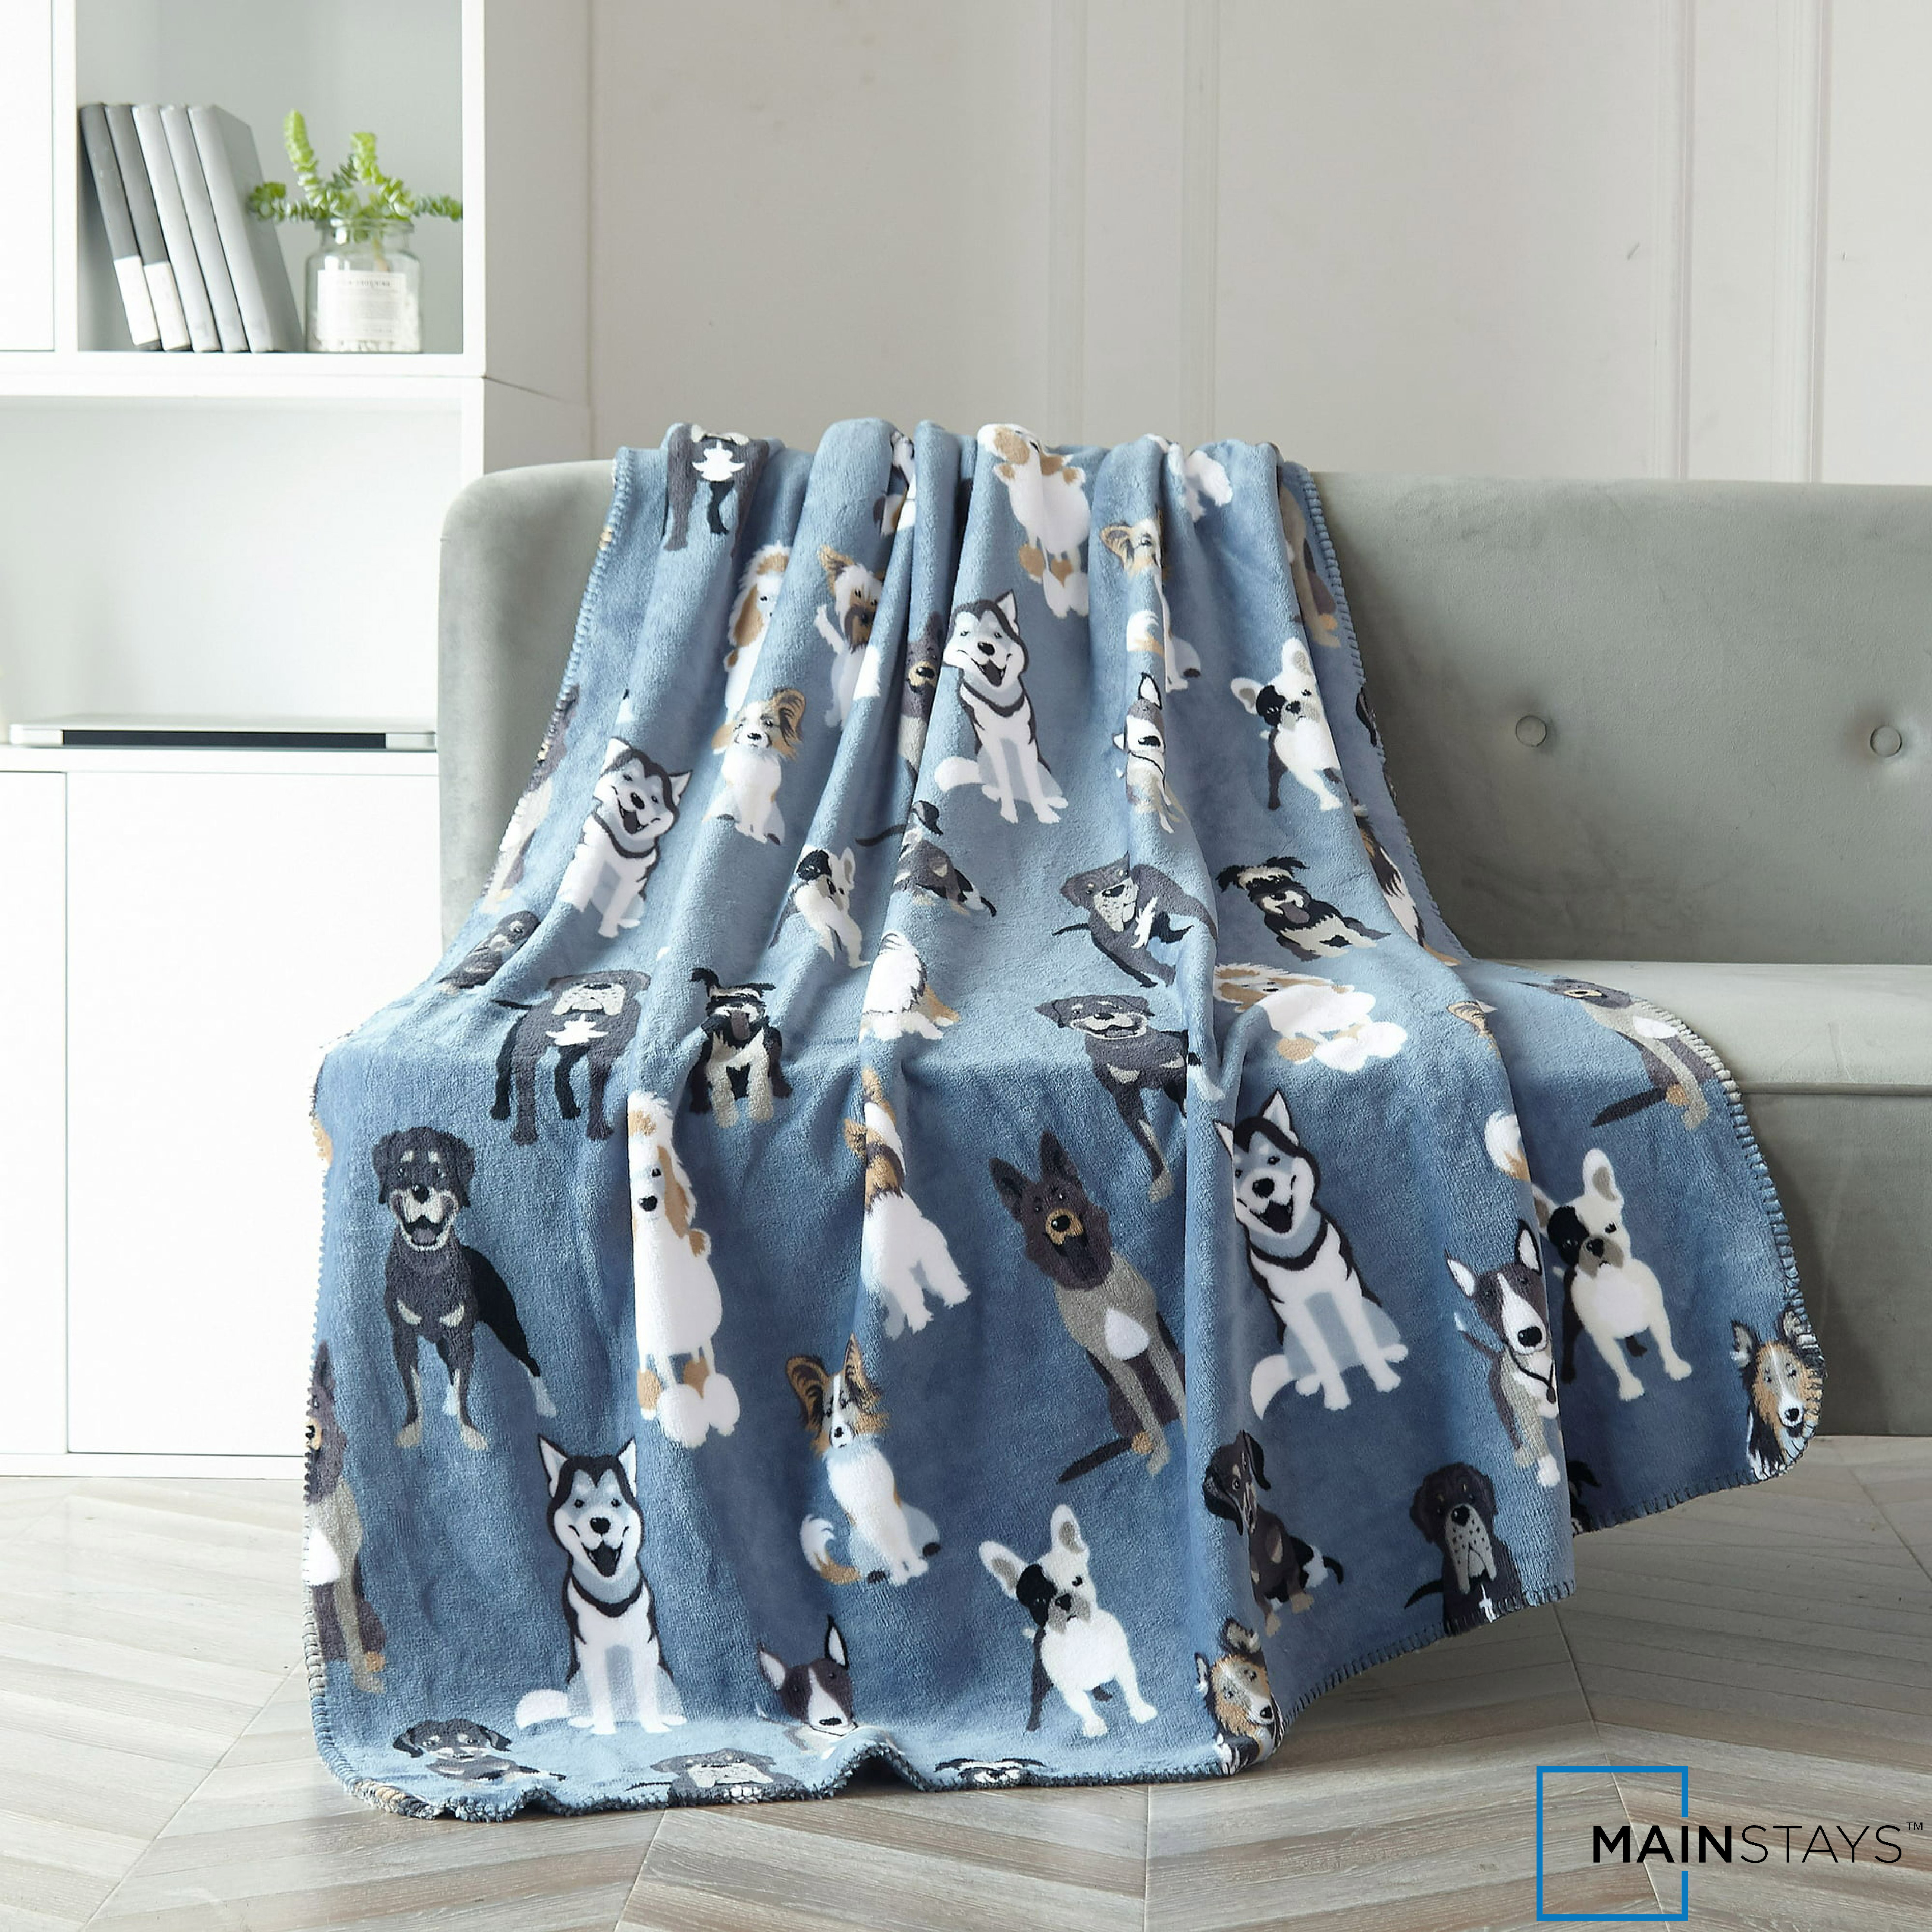 Mainstays Blue Dogs Plush Throw Blanket 50" x 60" - image 1 of 6